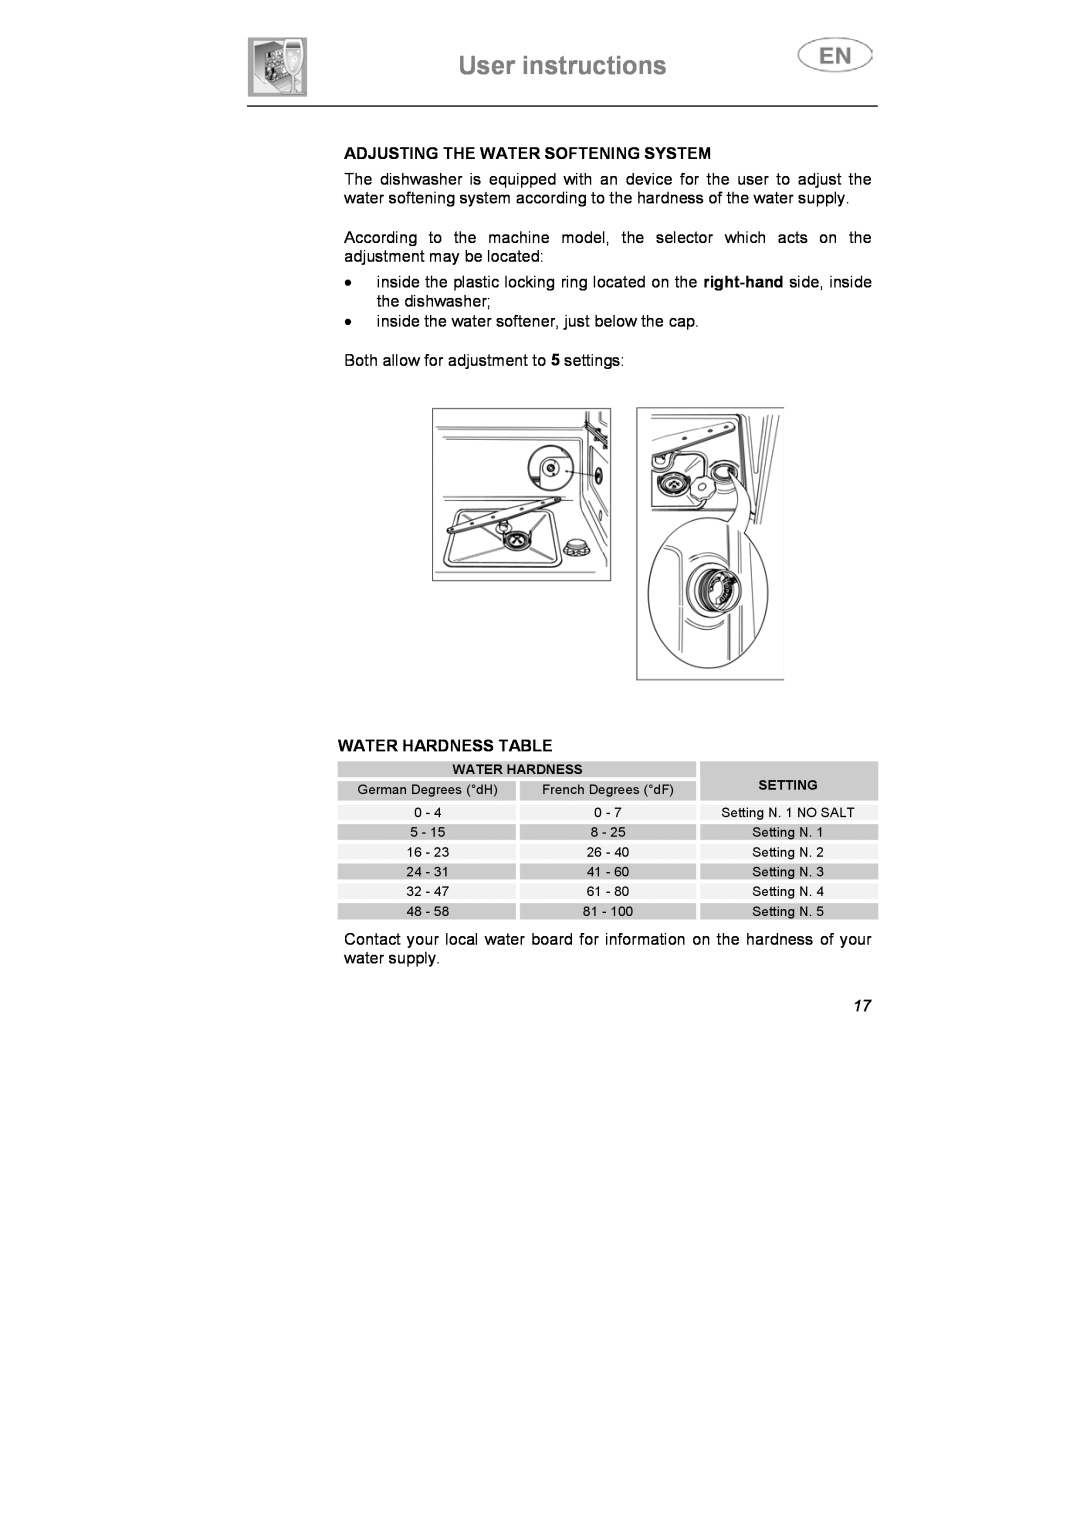 Smeg CA01-3 instruction manual User instructions, Adjusting The Water Softening System, Water Hardness Table 